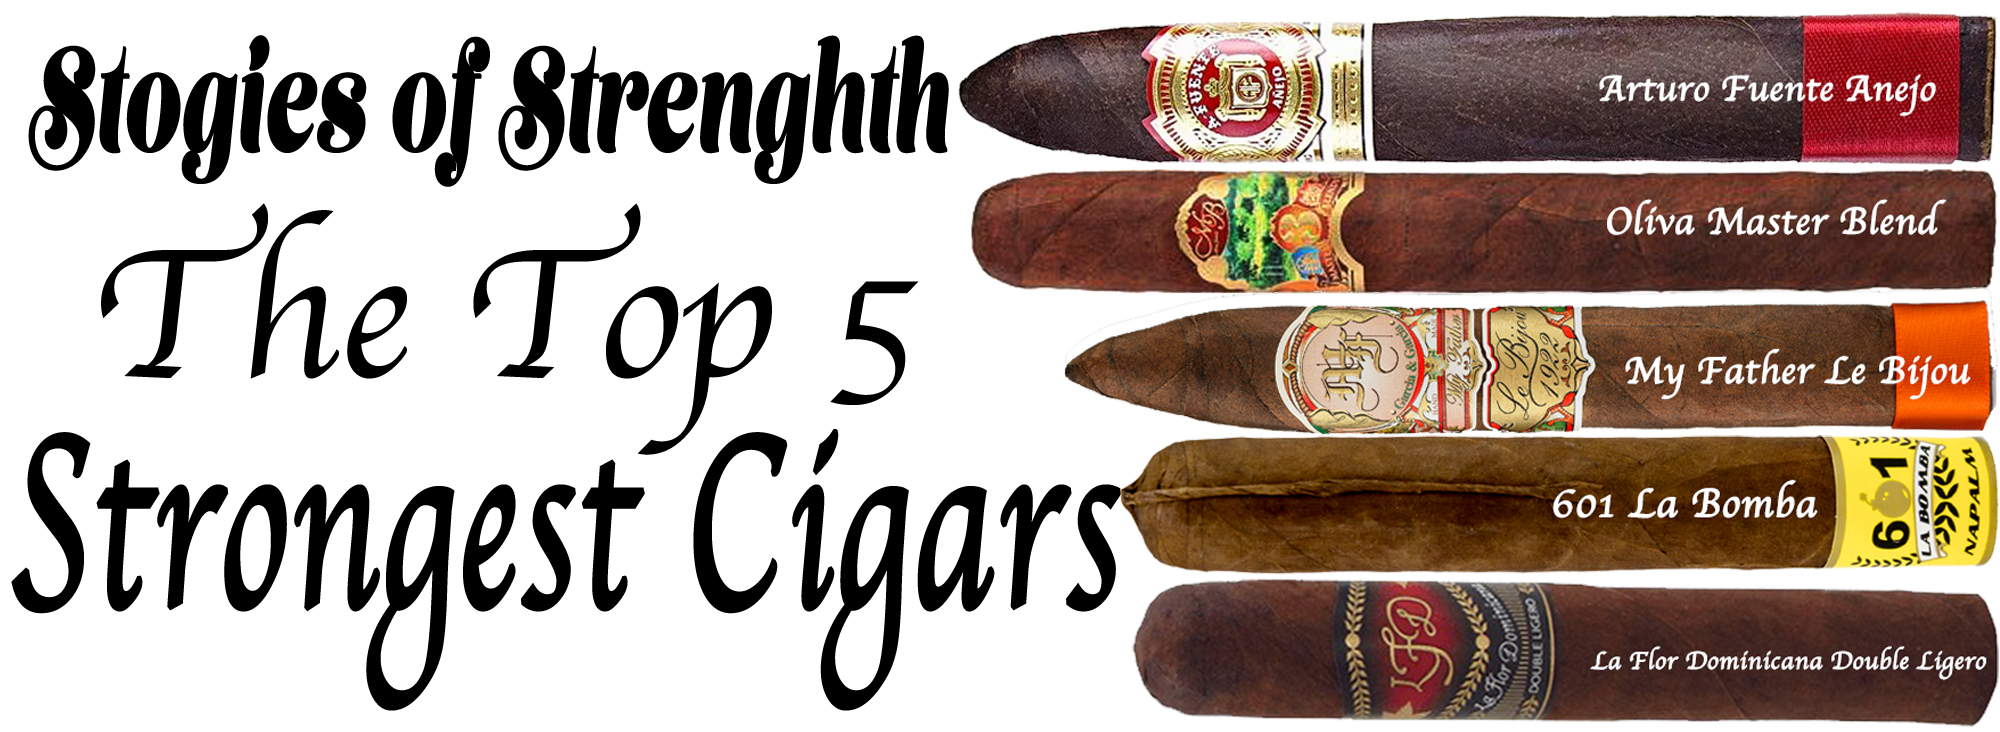 Stogies of Strength: The Top 5 Strongest Cigars